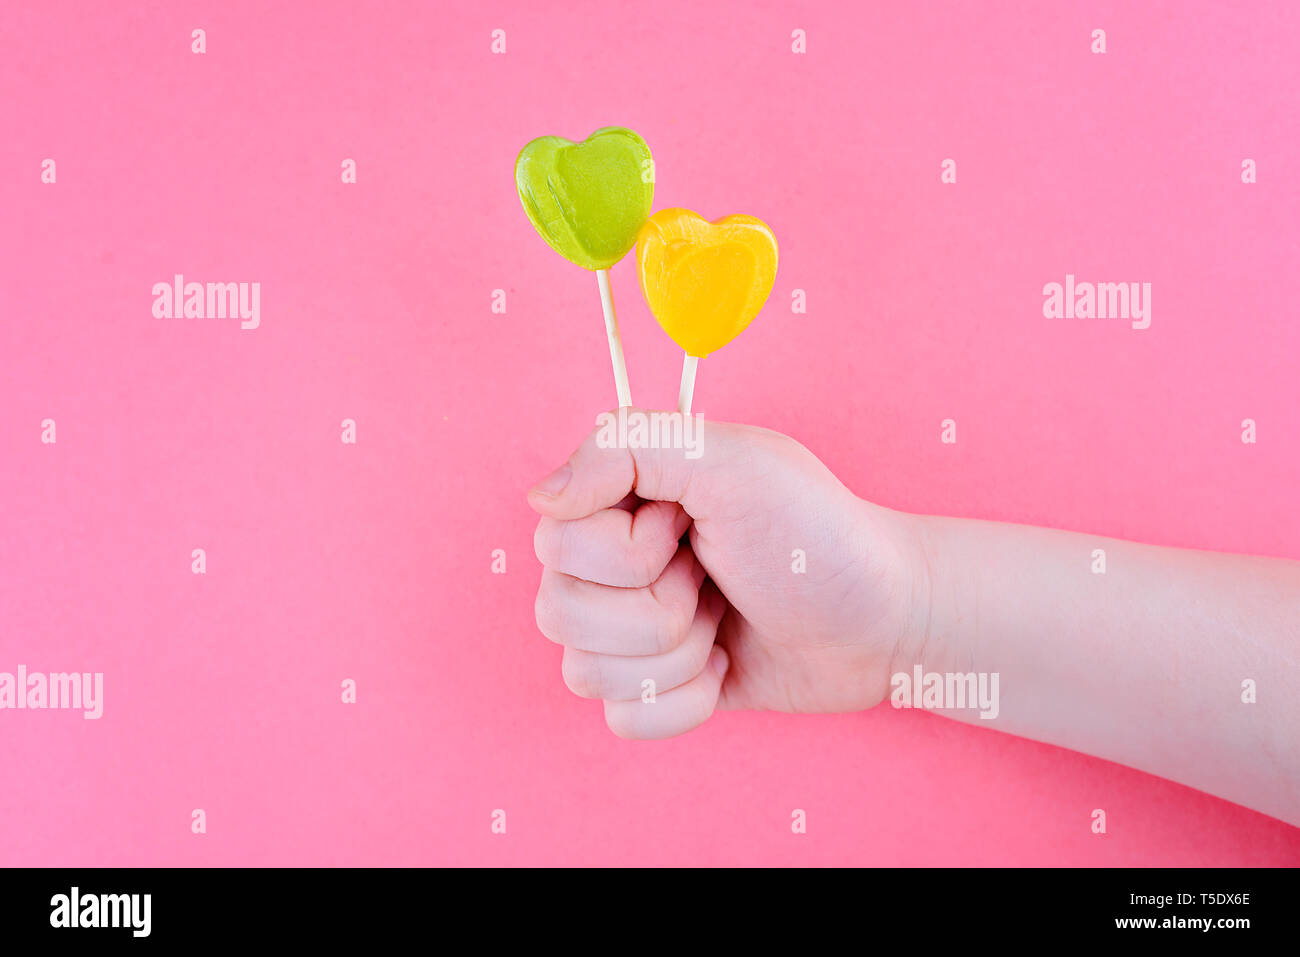 Yellow and Green Heart Shaped Lollipops. In the children's hand. On pink background Stock Photo